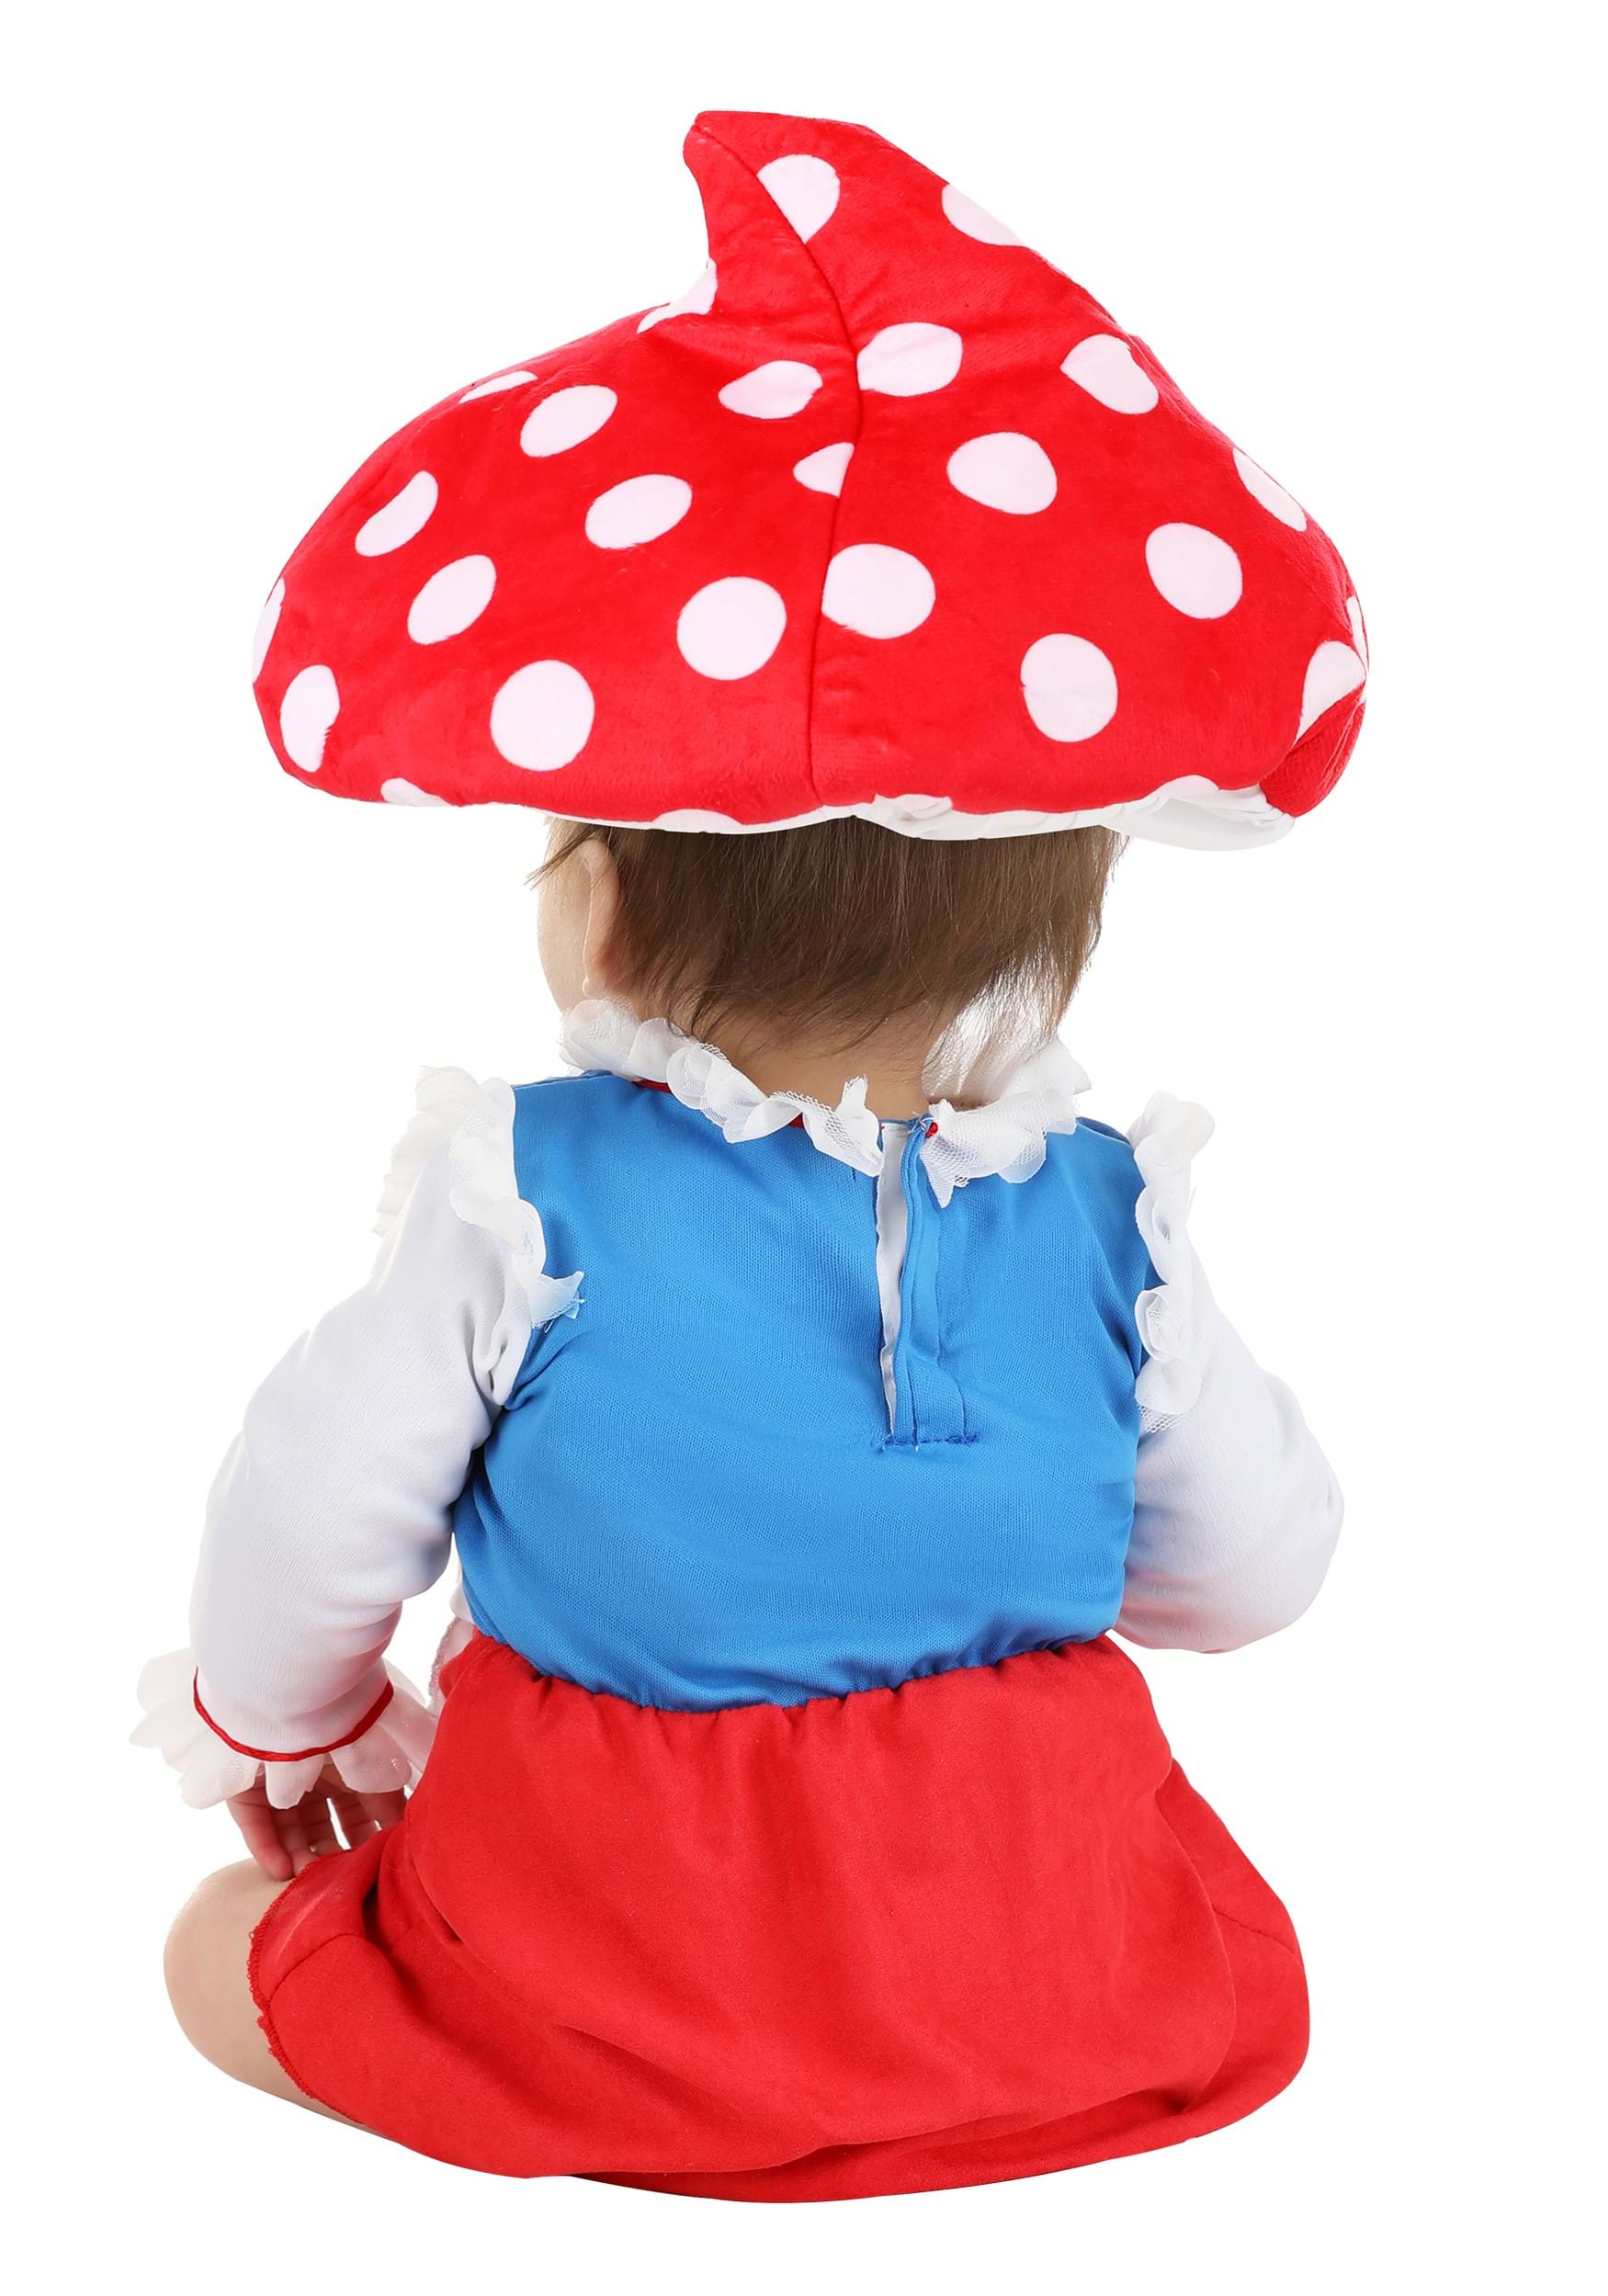 Gentle-Hearted Infant Garden Gnome Costume